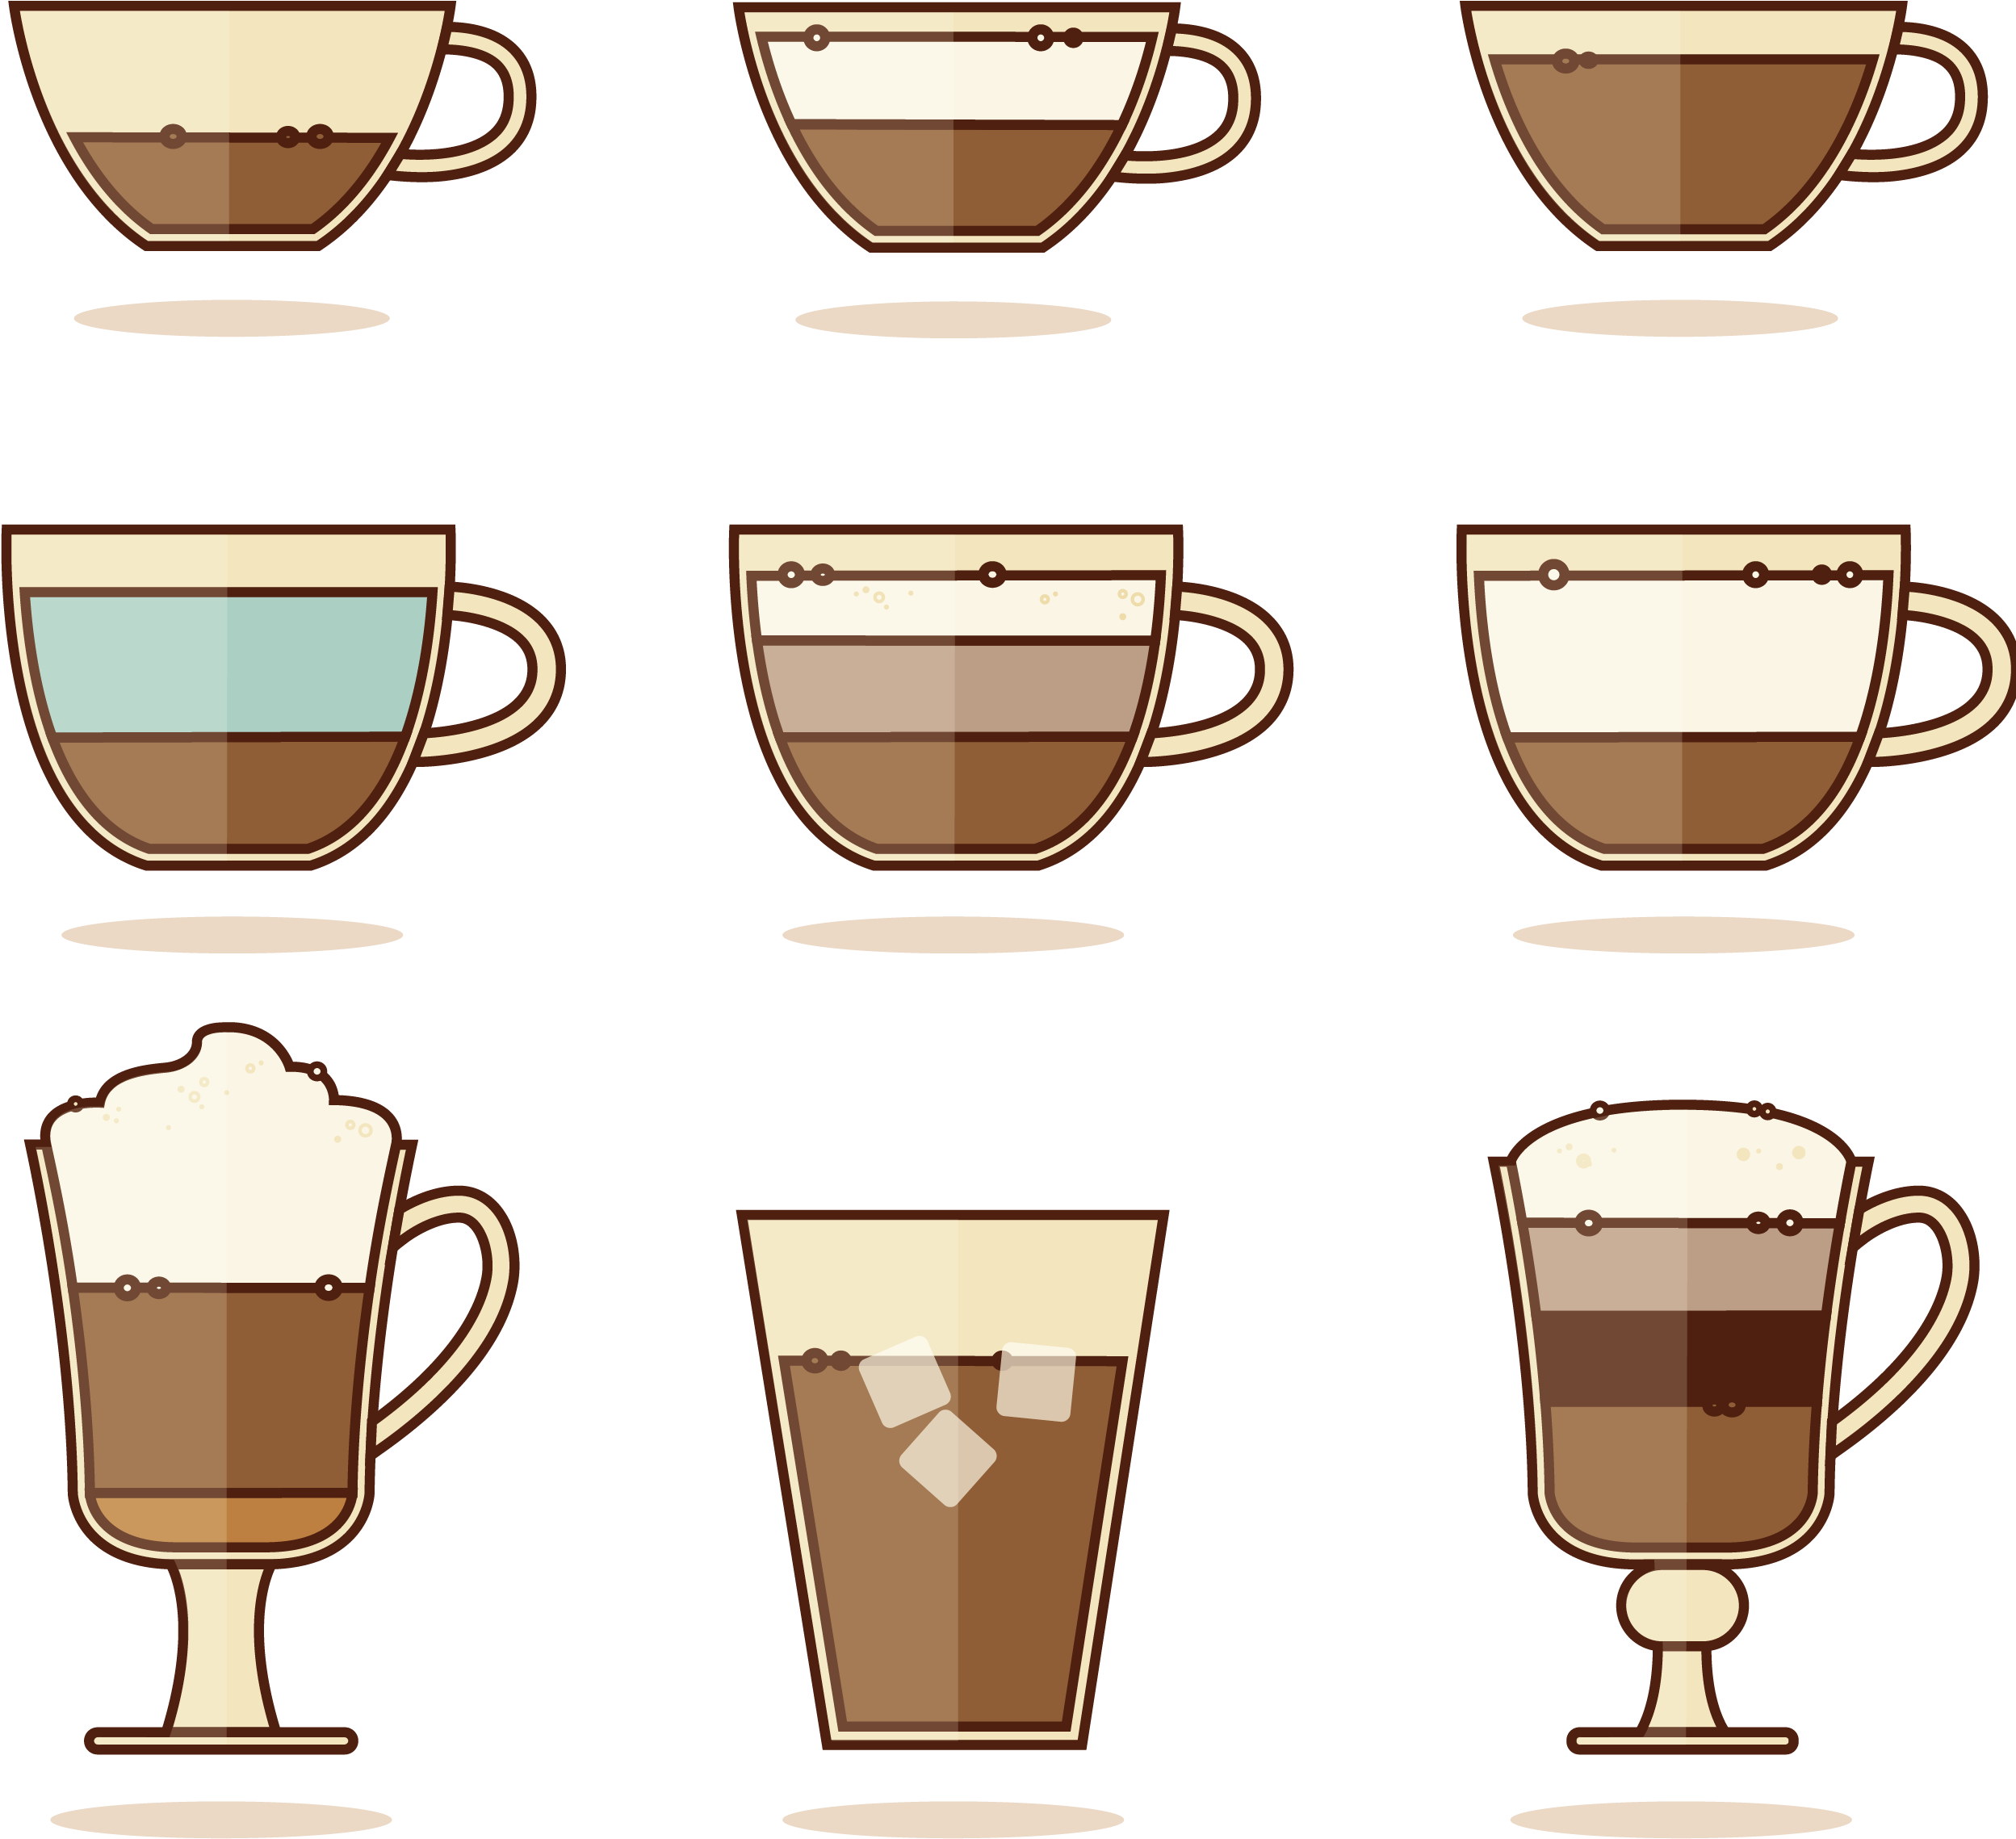 clipart about Iced Coffee Espresso Cafe Coffee Cup - Coffee, Find more high...